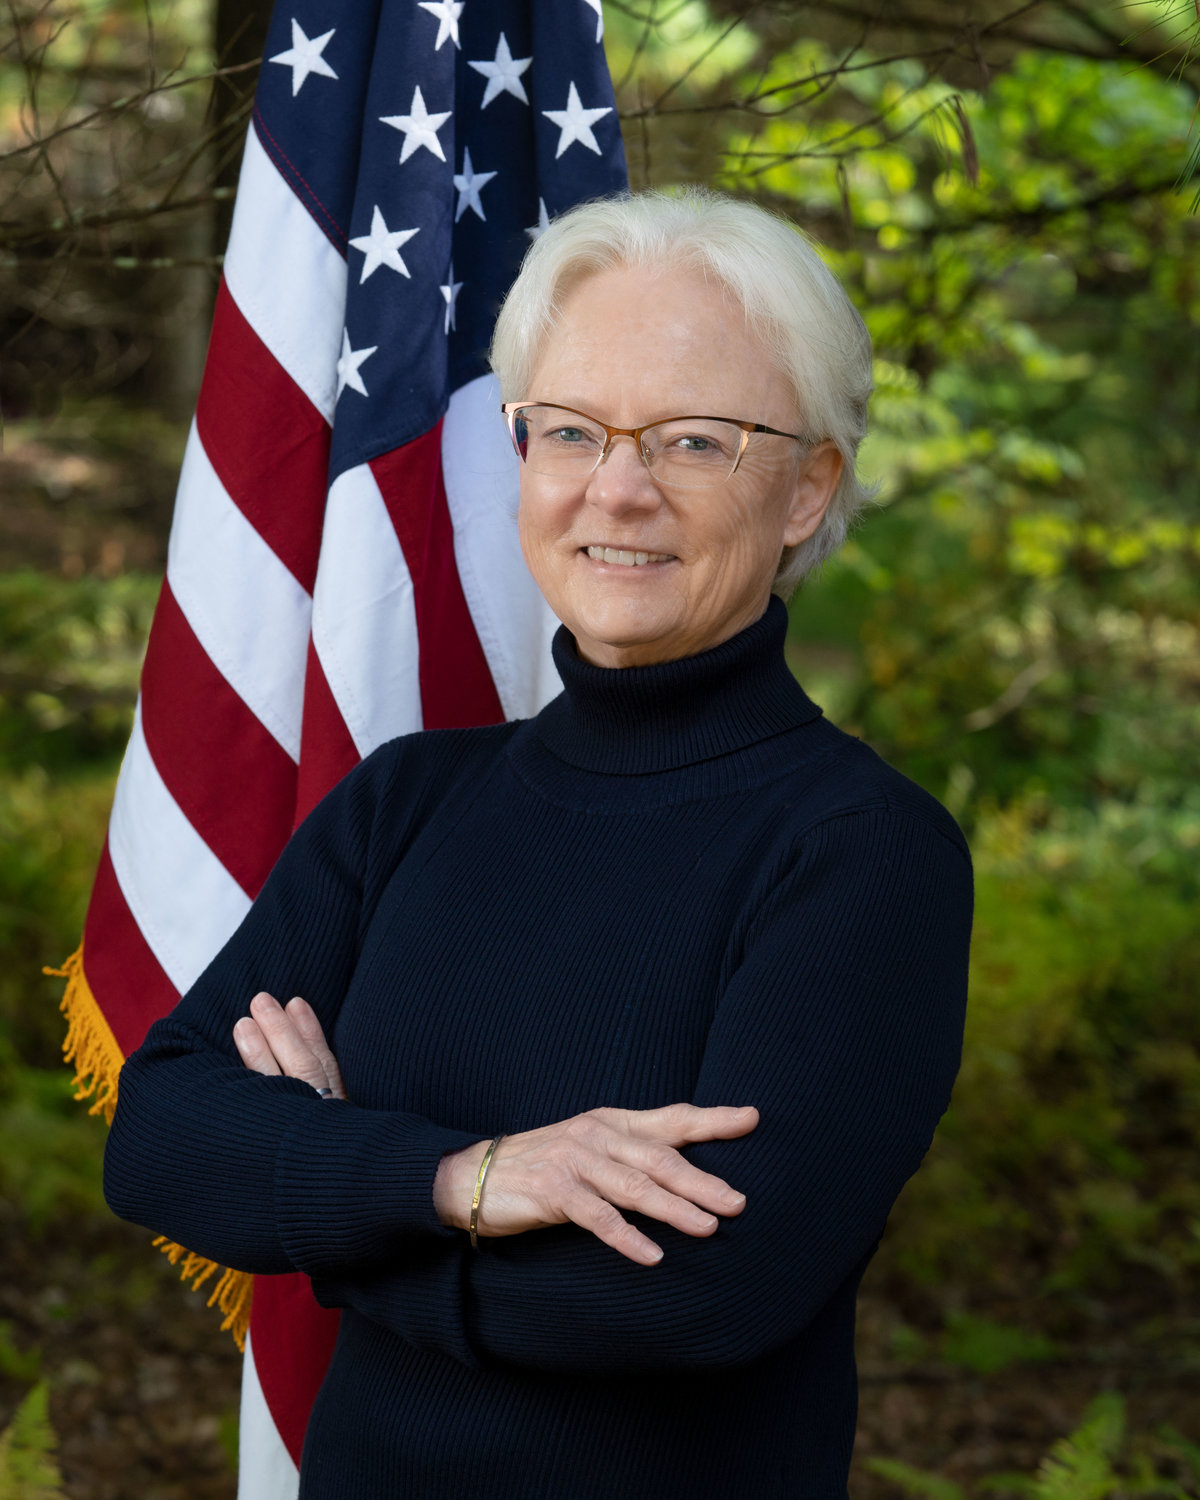 Marian Keegan is running in the May 17 PA Democratic Primary in District 139.